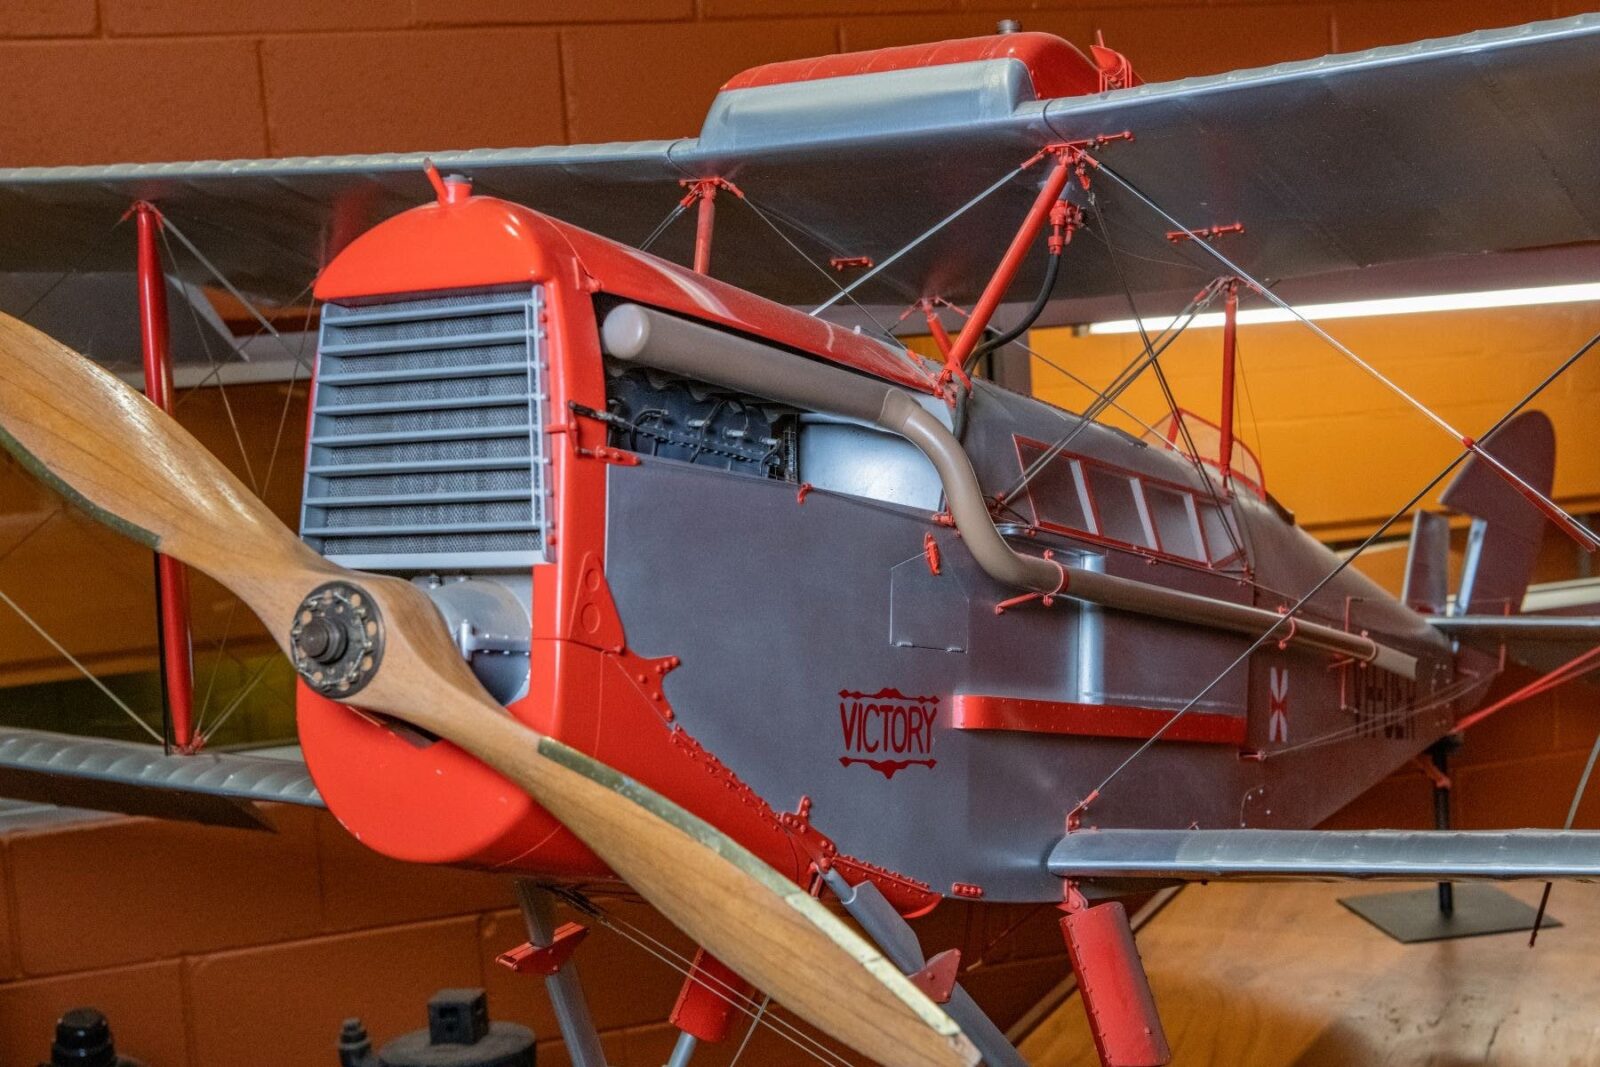 Quarter scale model of the Victory, the first aerial ambulance, that took flight 17th May 1928